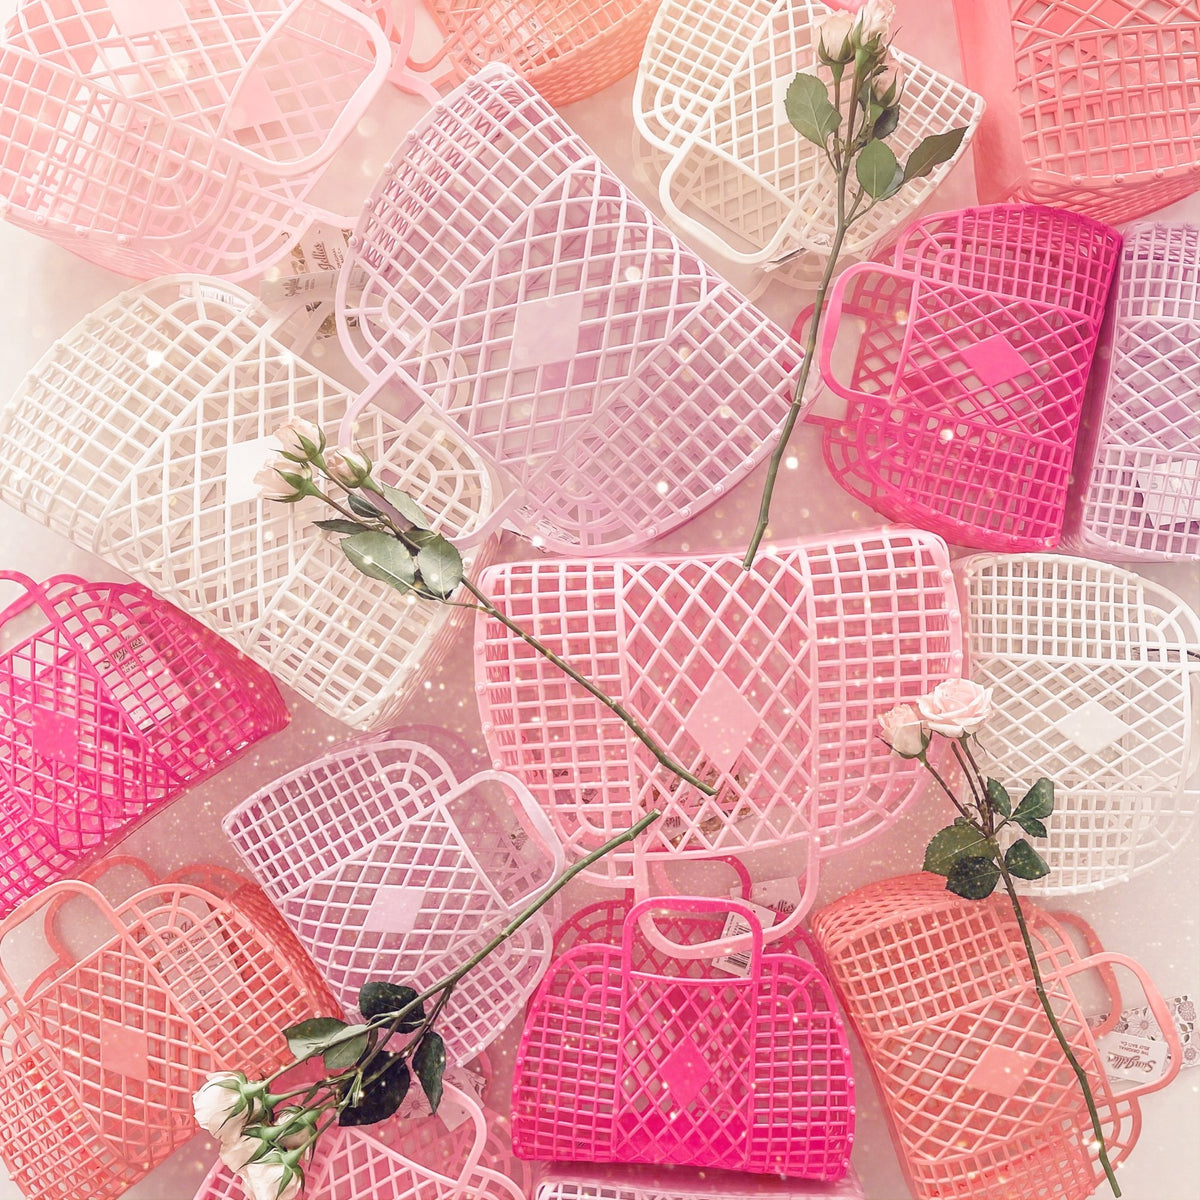 Sun Jellies - Delightfully nostalgic Jelly Bags & Jelly Shoes